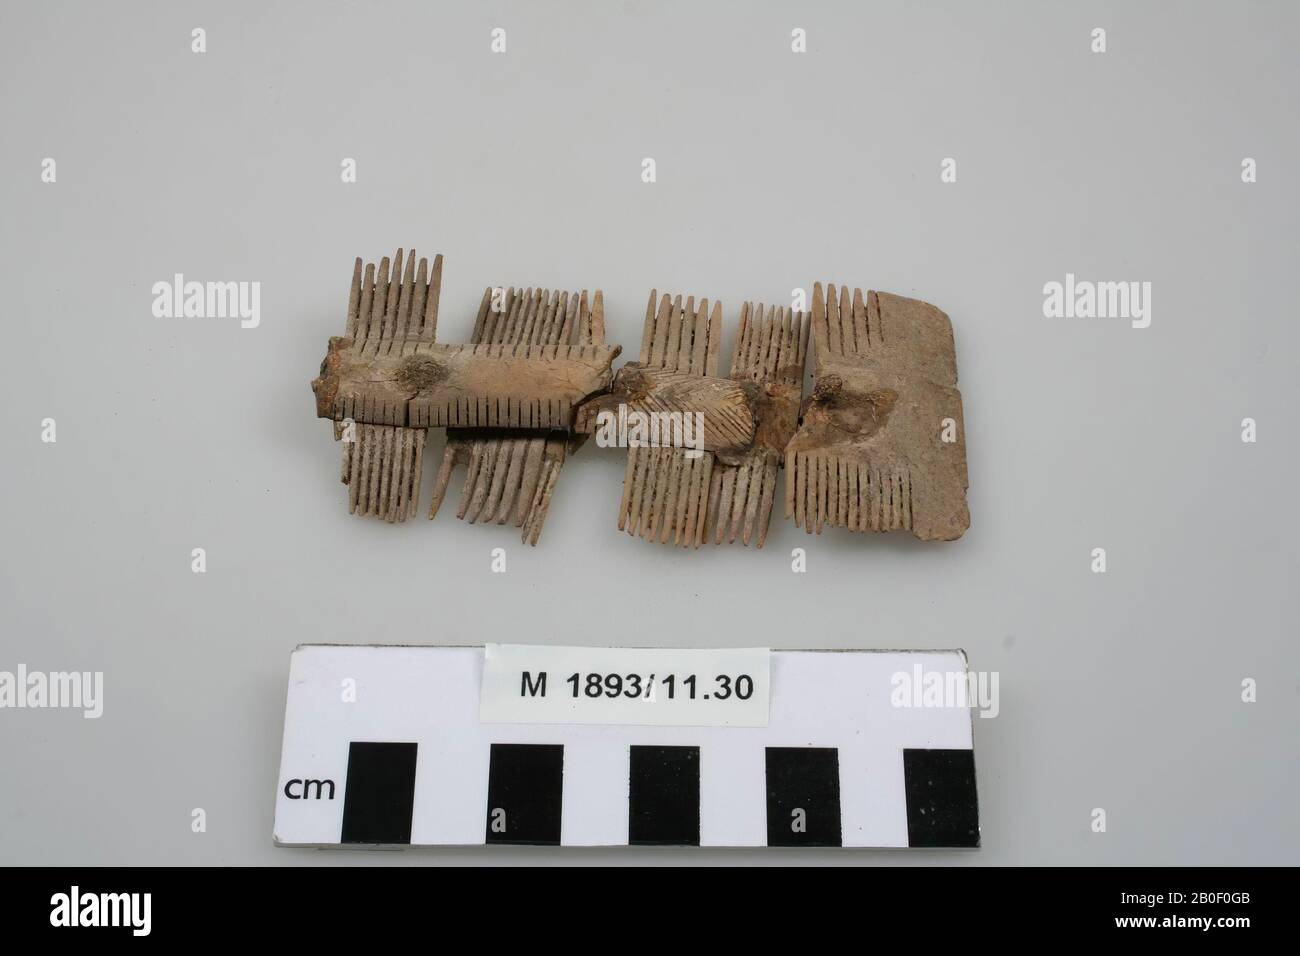 Leg comb, broken into 5 relatively large parts and some small particles. Old bondings, which have released again, comb, organic, bone, 5 x 1 x 3 cm (largest fragment), Germany, unknown, unknown, Niederbreisig Stock Photo